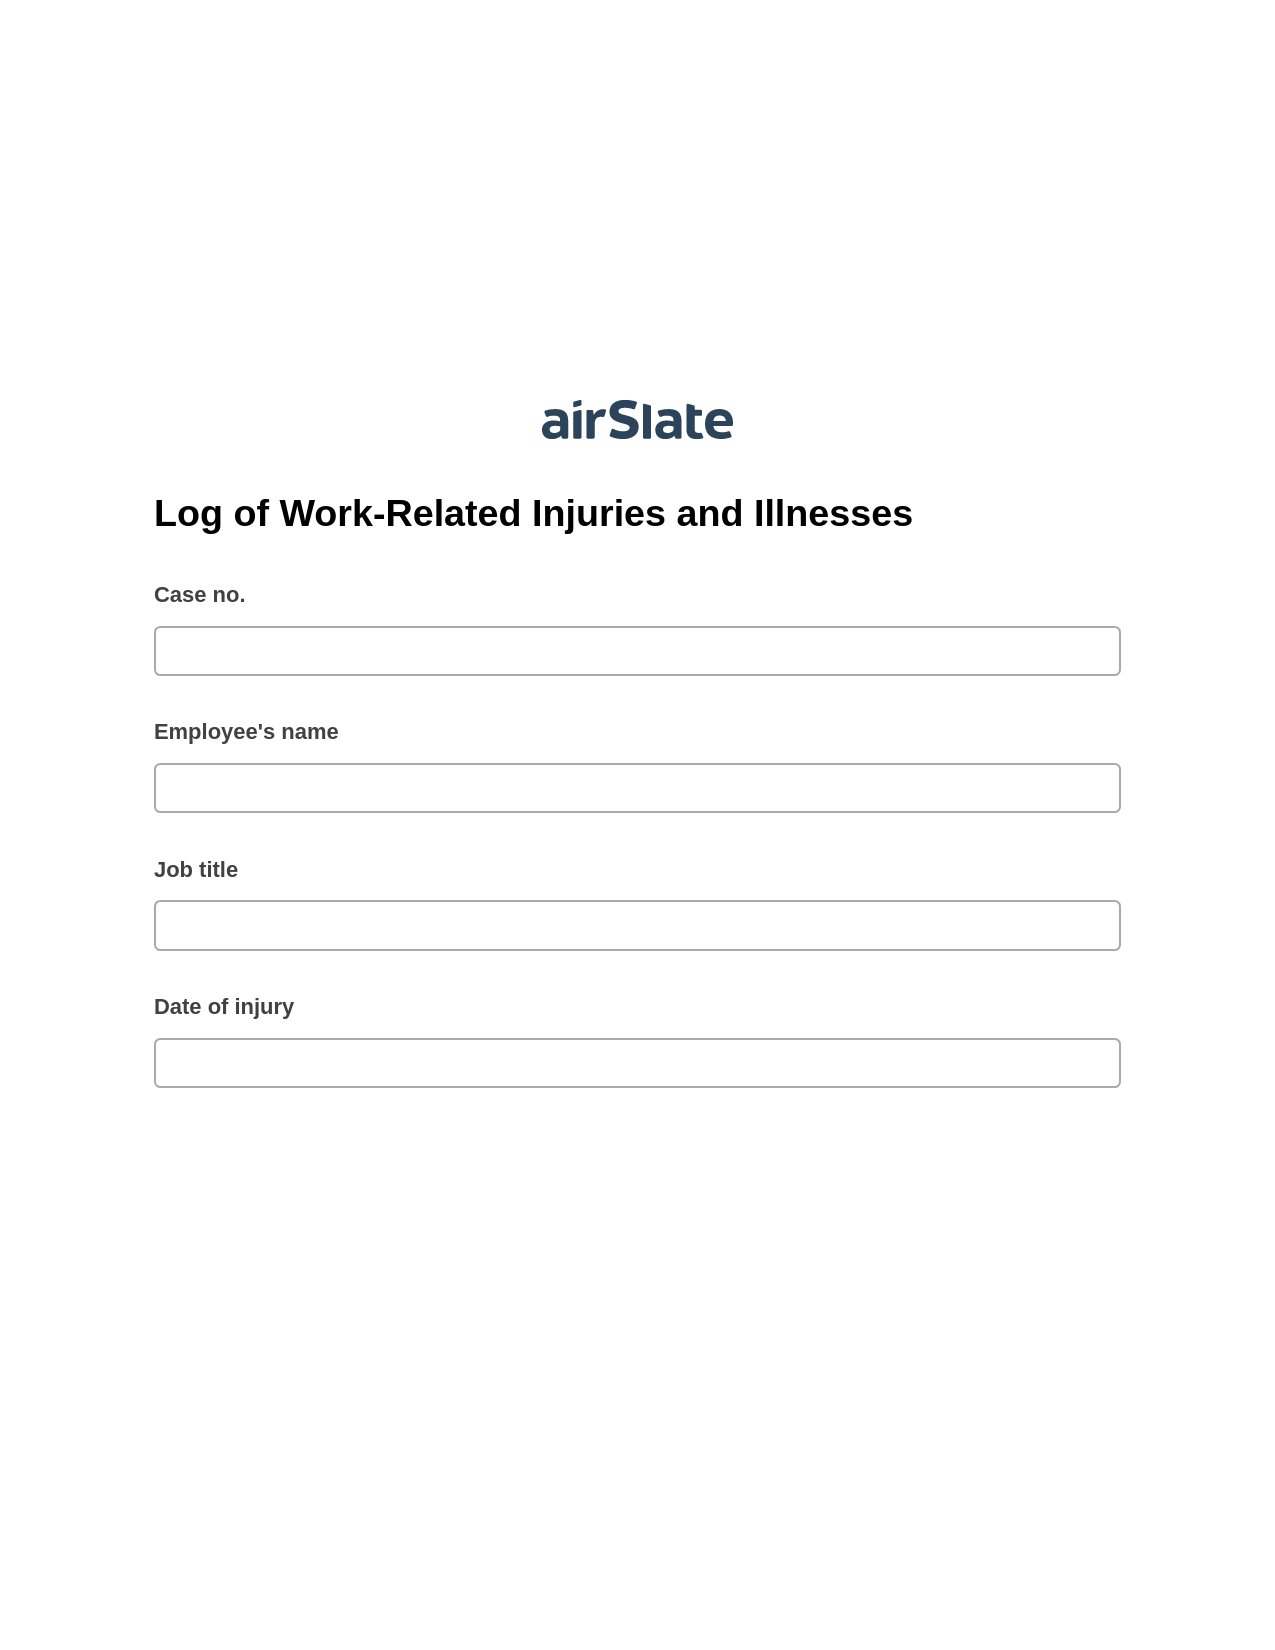 Log of Work-Related Injuries and Illnesses Pre-fill from Office 365 Excel Bot, Unassign Role Bot, Box Bot